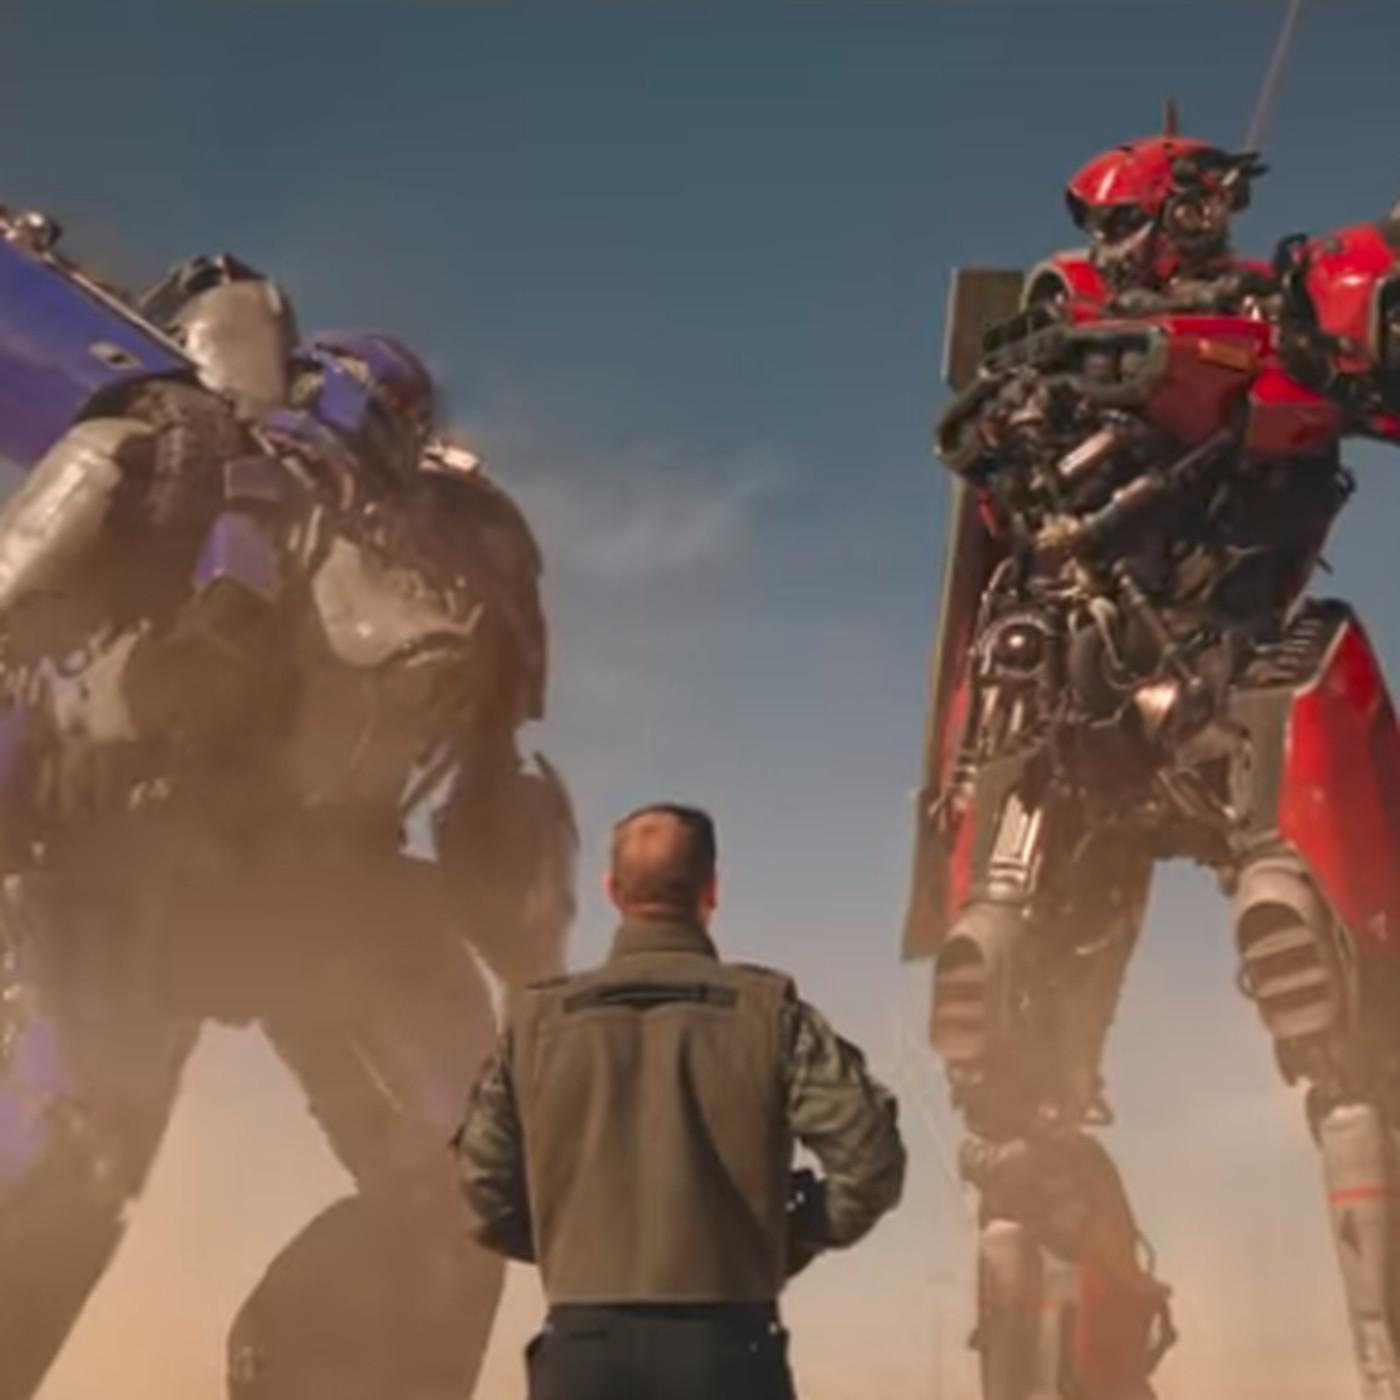 John Cena might not be a bad guy in Bumblebee